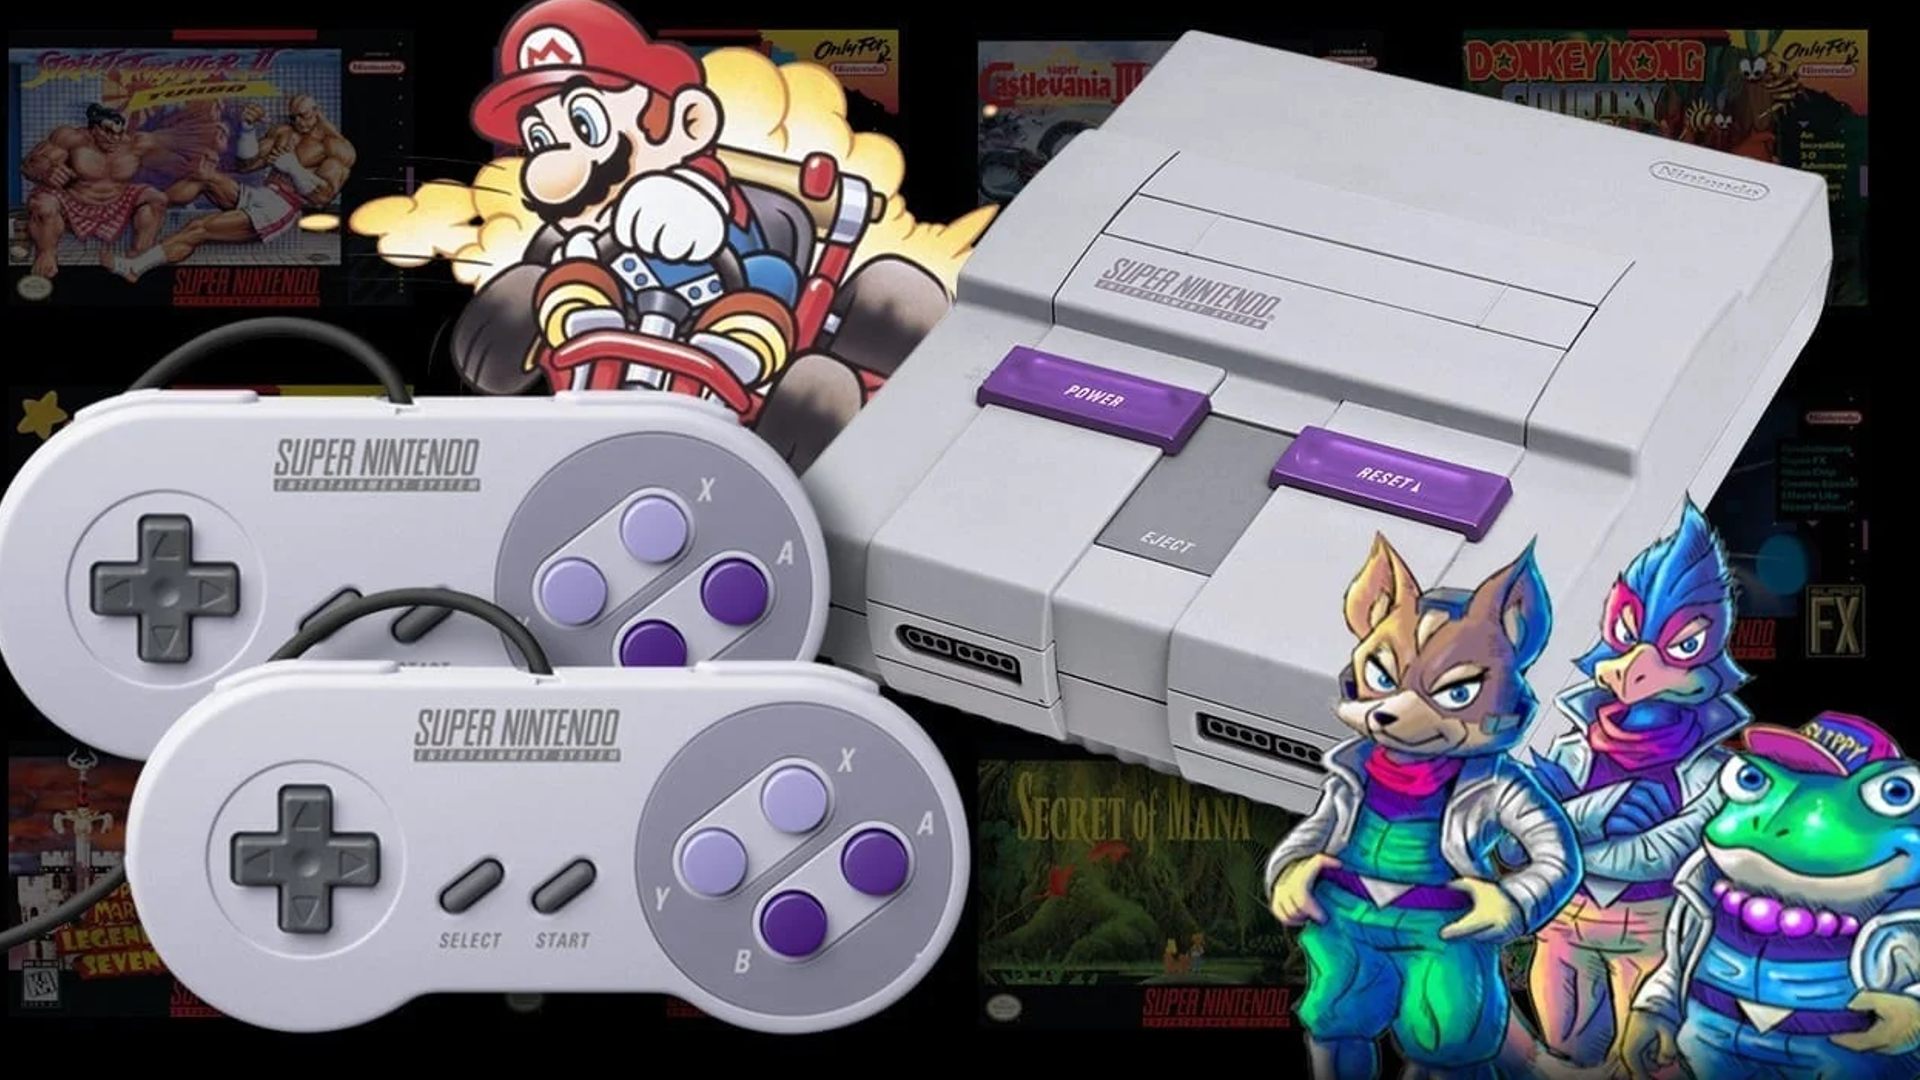 Mario, the SNES Classic and Star Fox characters can be seen